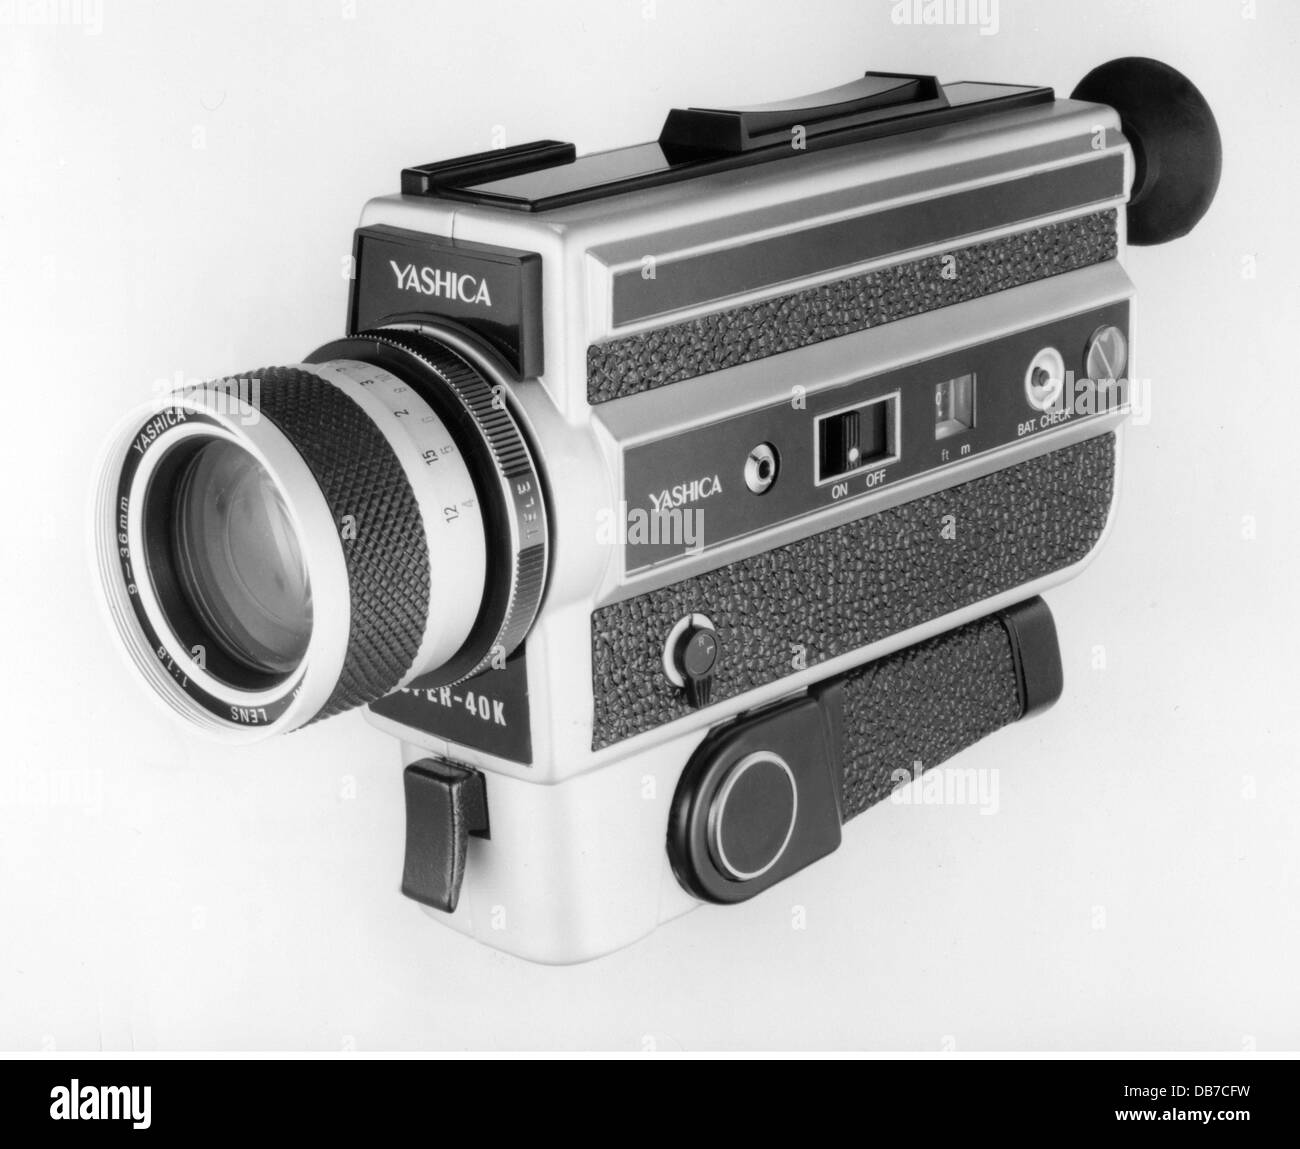 photography, cameras, film cameras, Yashica Super 40 K, Japan, 1972 - 1974, 20th century, 1970s, 70s, technology, engineering, technologies, cine camera, cine cameras, substandard film, substandard films, Super 8 mm film, Super 8, leisure time, free time, spare time, hobby, fad, fads, hobbies, clipping, cut out, cut-out, cut-outs, historic, historical, clipping, cut out, cut-out, cut-outs, Additional-Rights-Clearences-Not Available Stock Photo